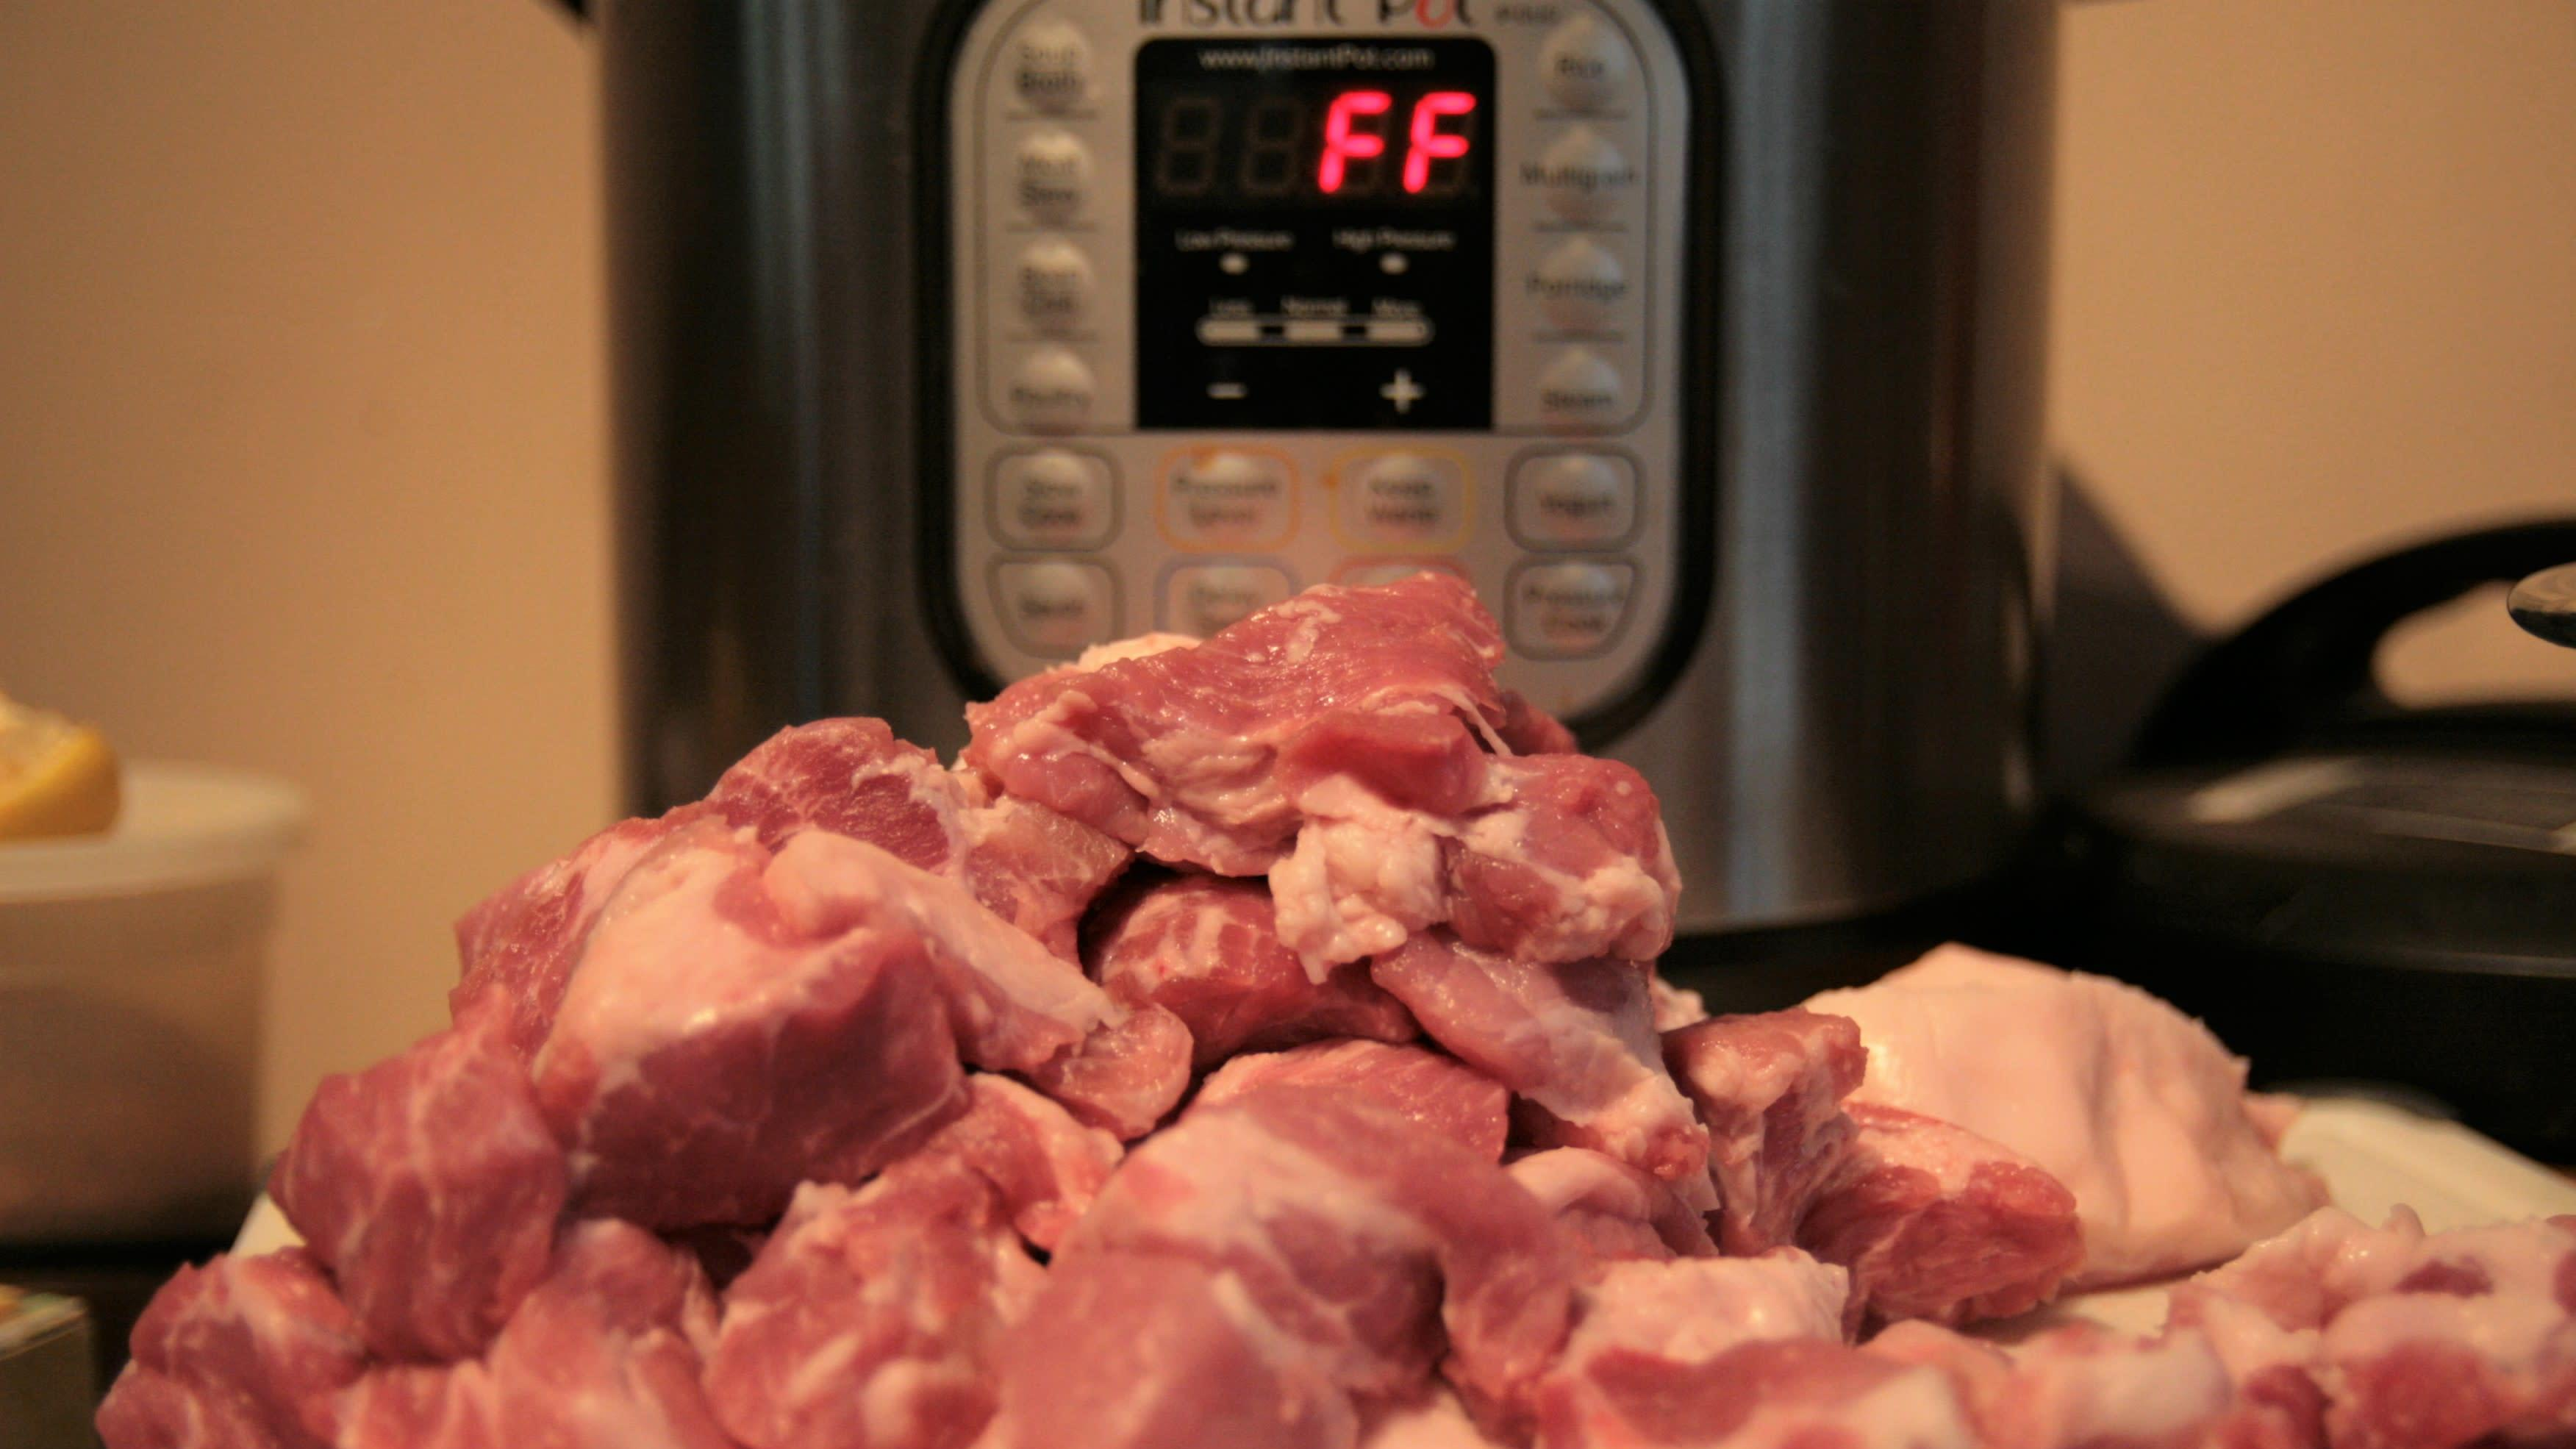 mound of chopped pork in front of instant pot